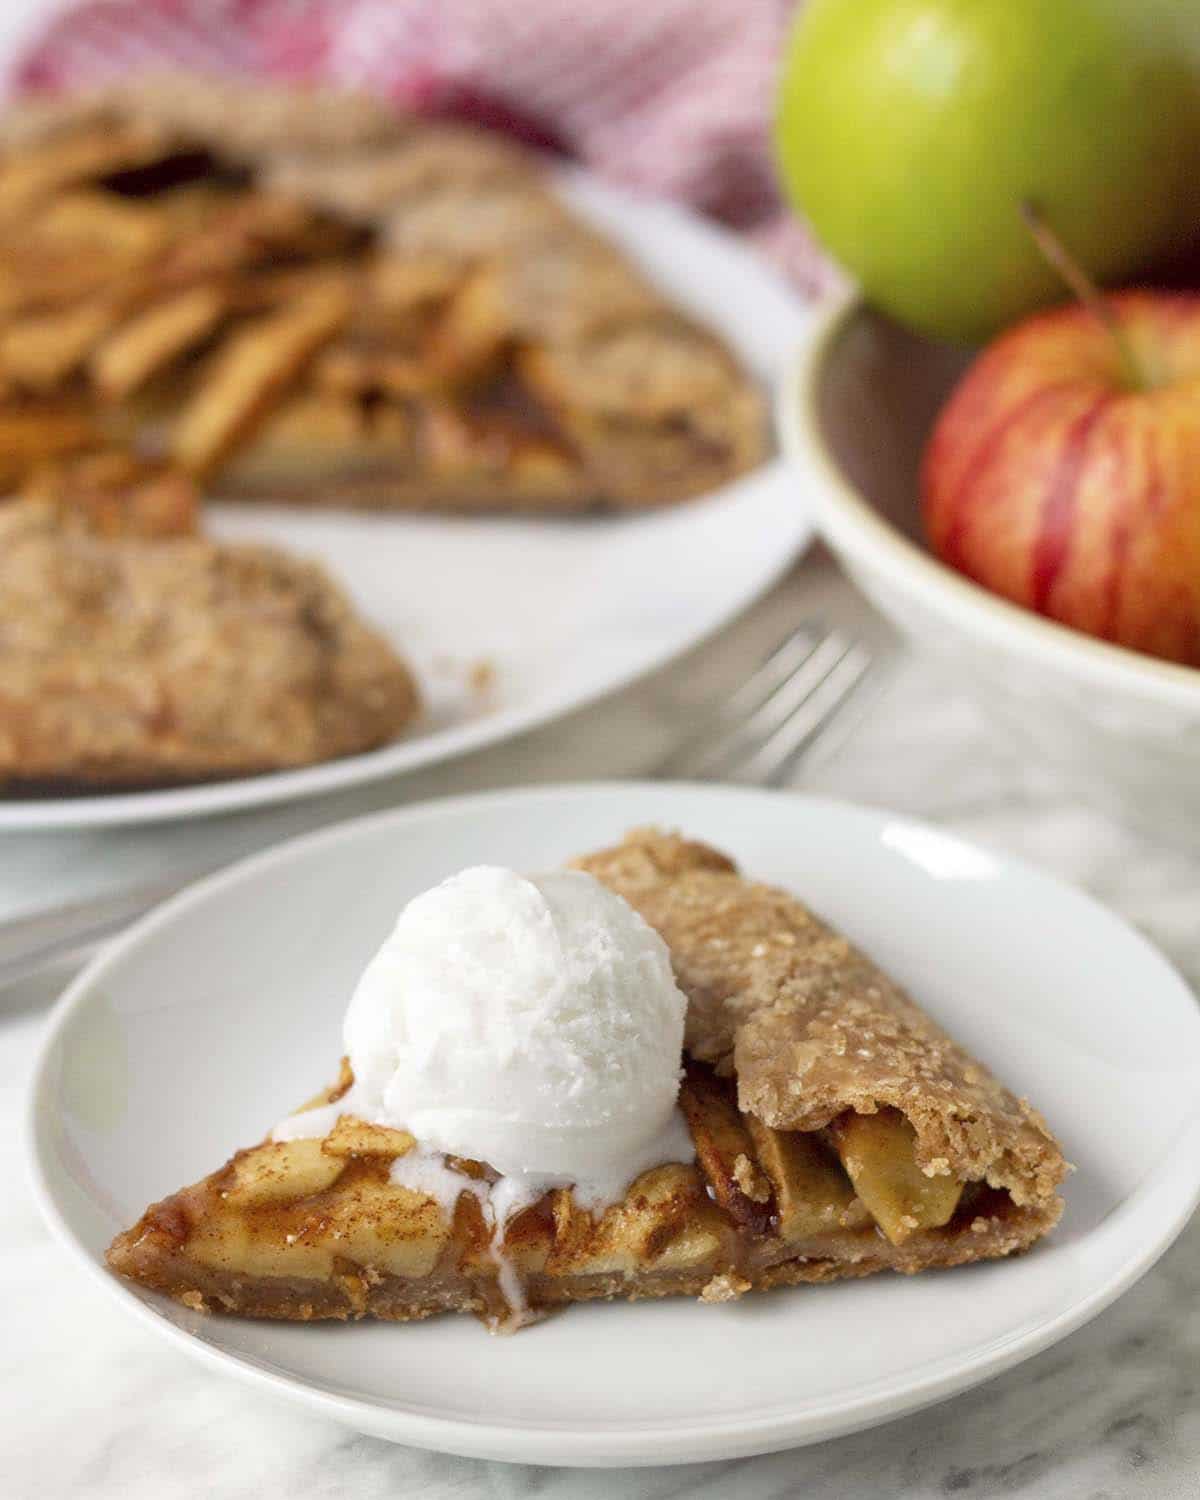 A slice of apple galette on a plate with a scoop of ice cream on top of it, a bowl of fresh apples sits behind the plate.